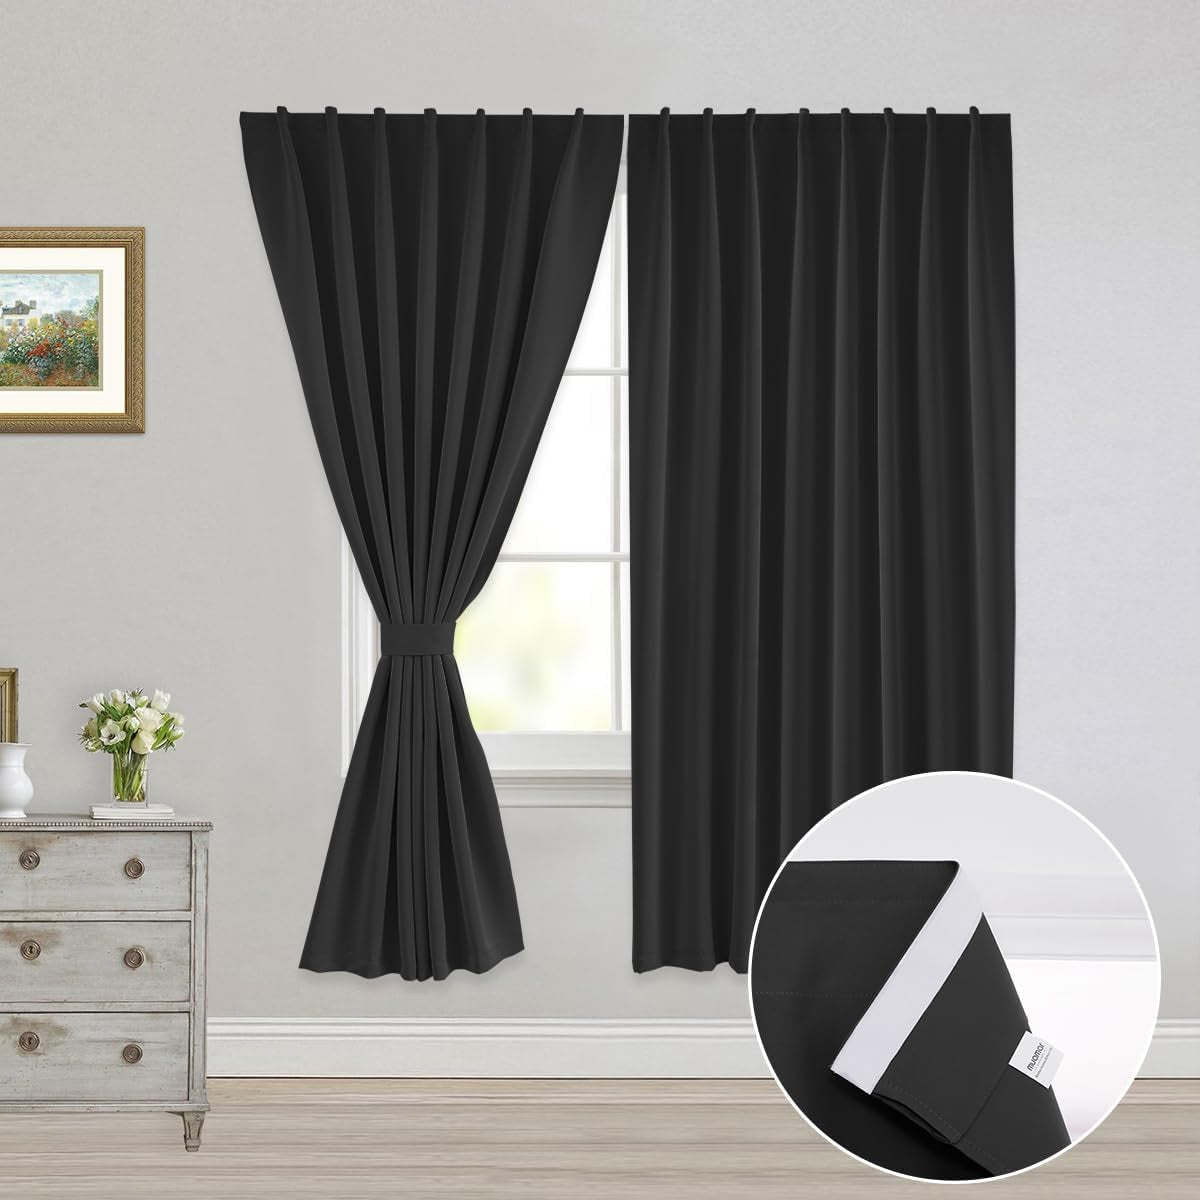 Muamar 2Pcs Blackout Curtains Privacy Curtains 63 Inch Length Window Curtains,Easy Install Thermal Insulated Window Shades,Stick Curtains No Rods, Black 42" W X 63" L  Muamar Black 52"W X 63"L 